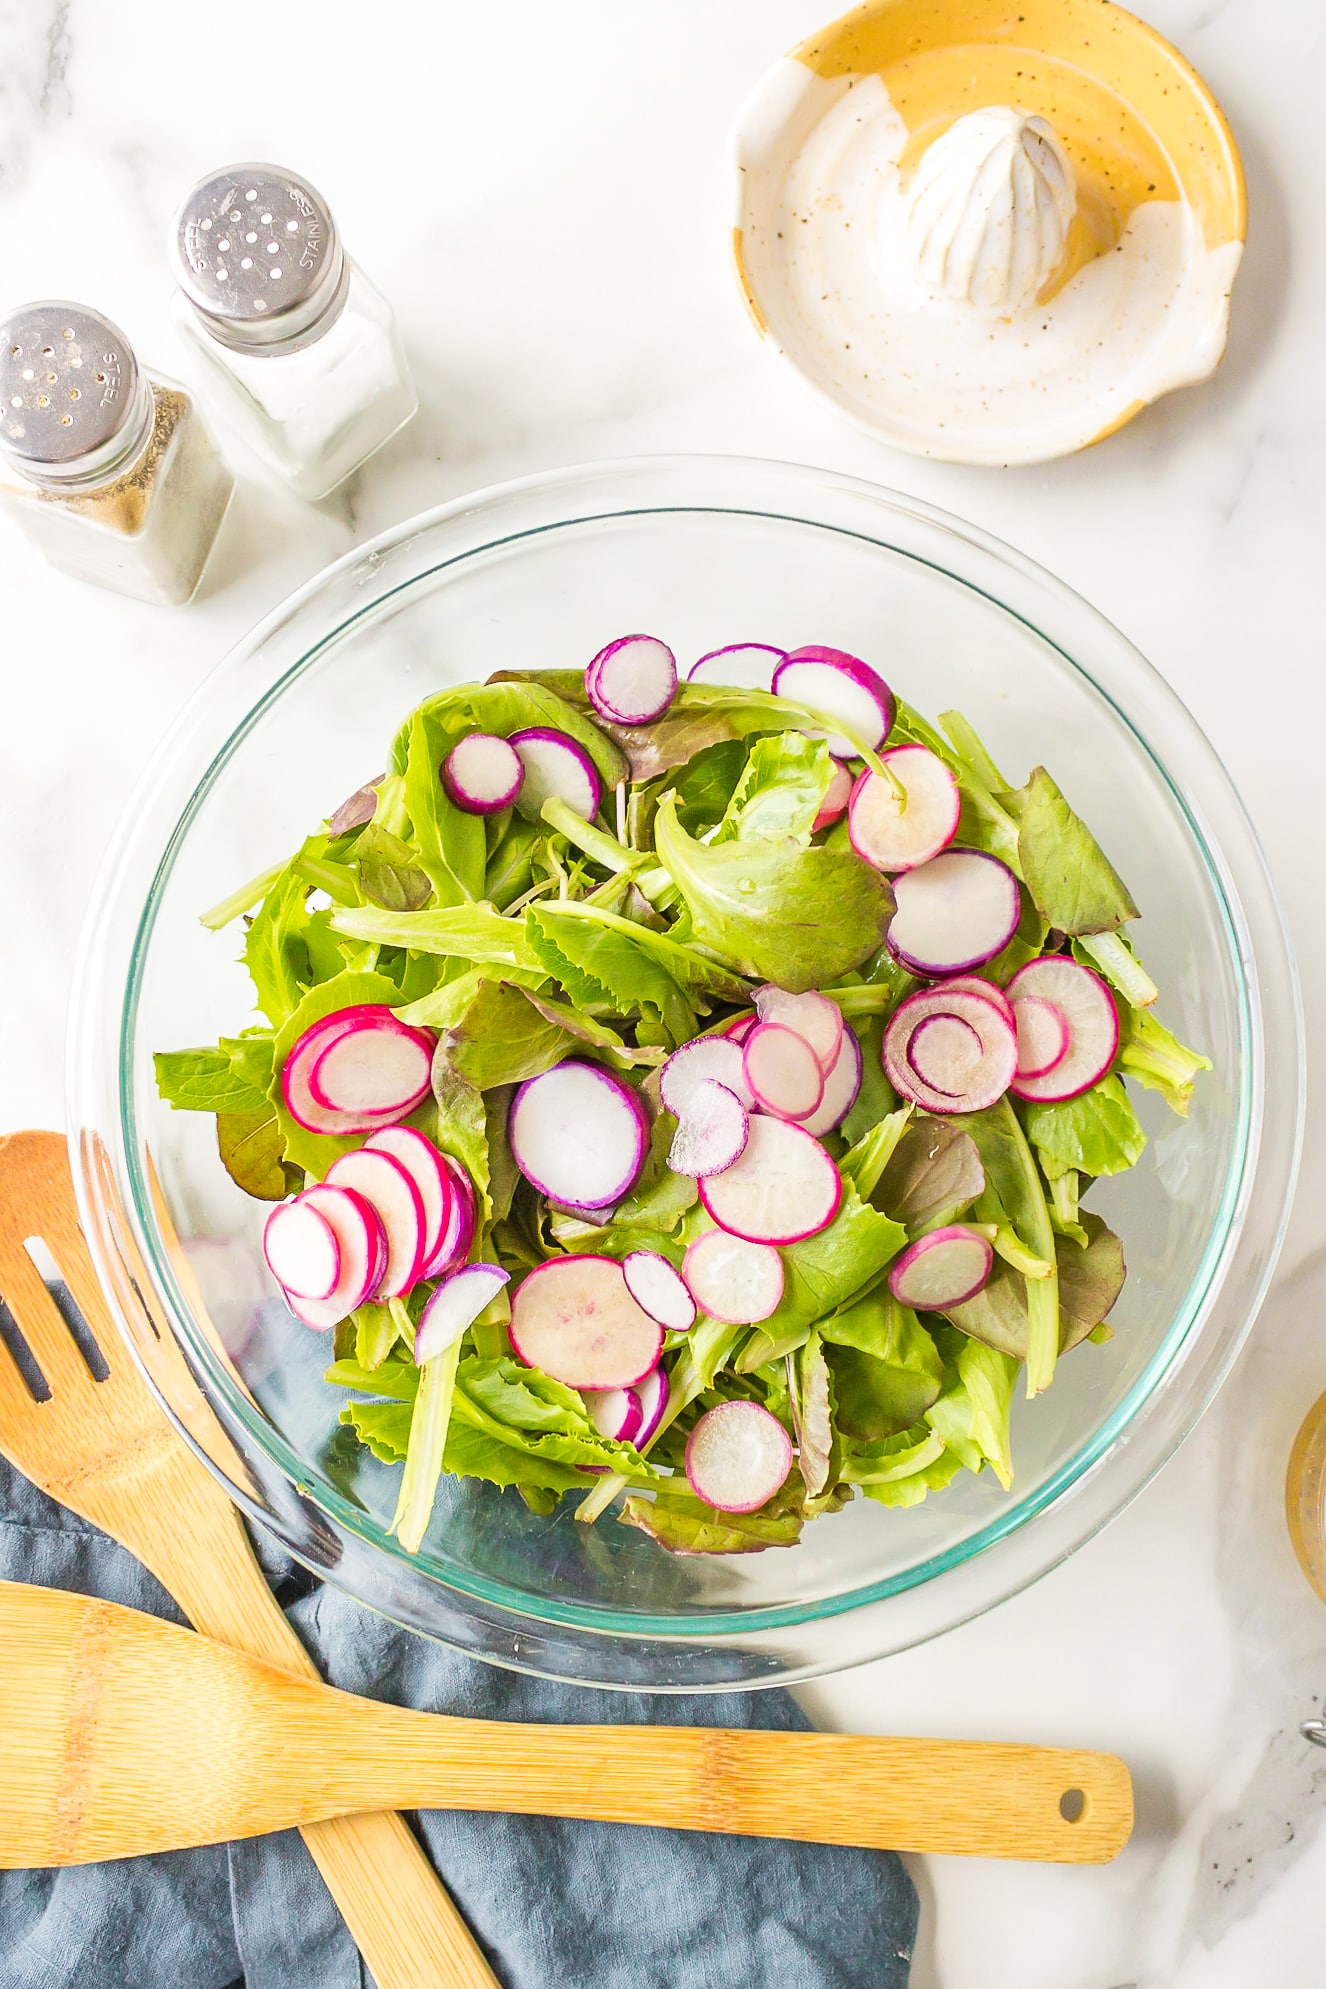 Baby romaine lettuce with radishes in a salad bowl ready to toss.